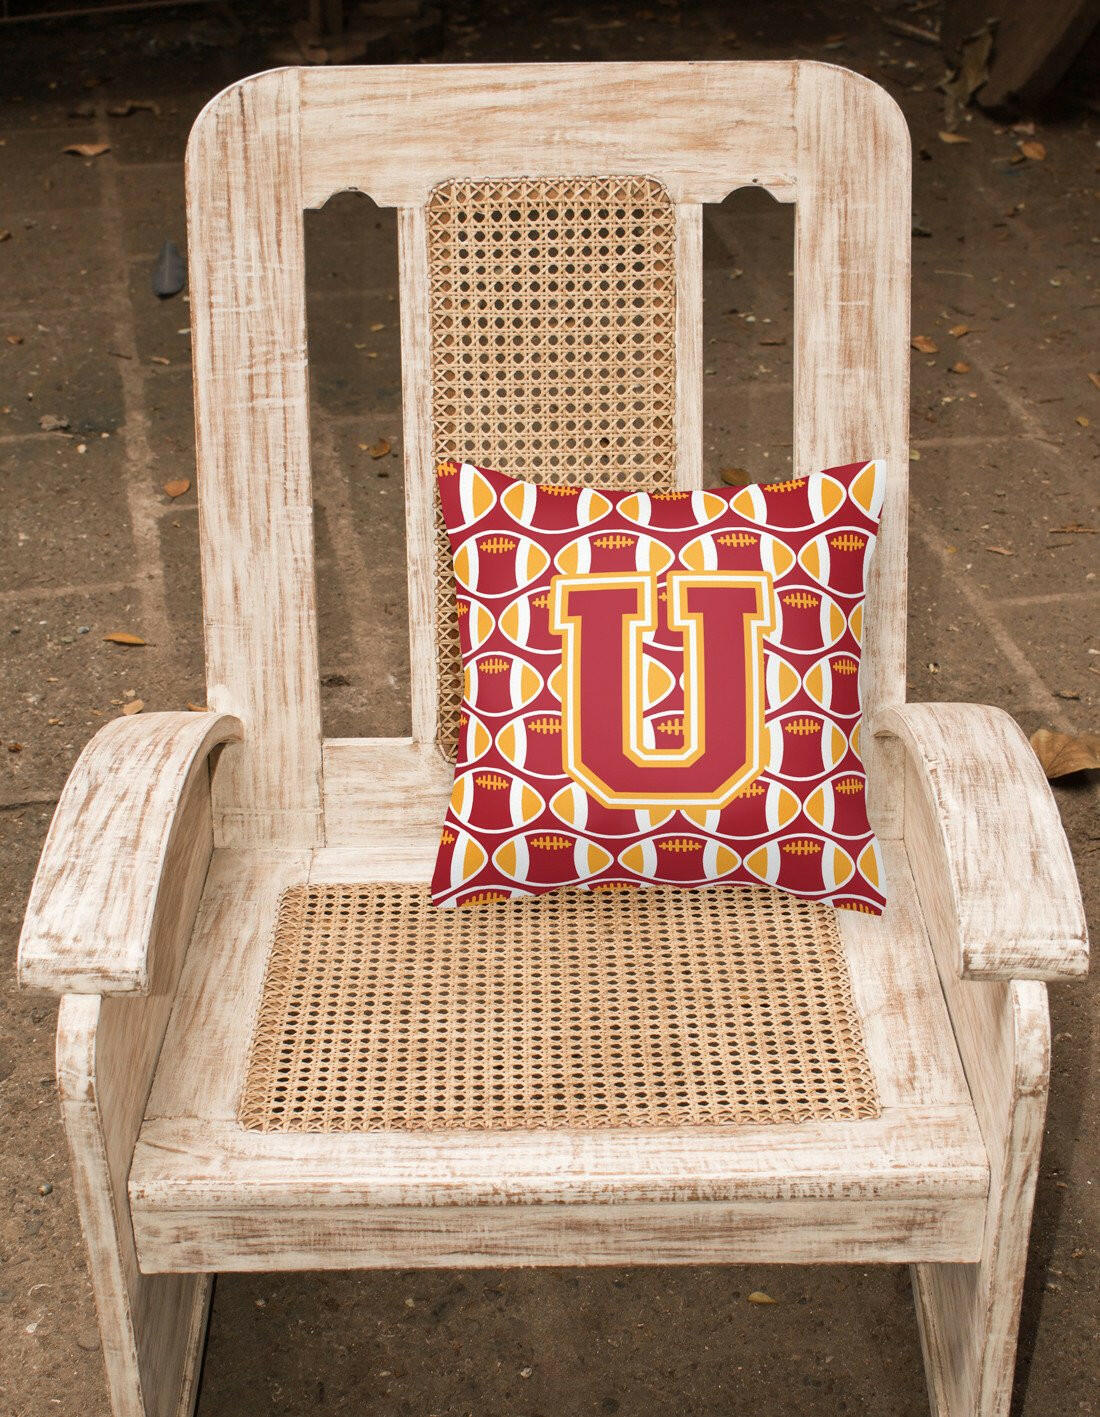 Letter U Football Cardinal and Gold Fabric Decorative Pillow CJ1070-UPW1414 by Caroline's Treasures